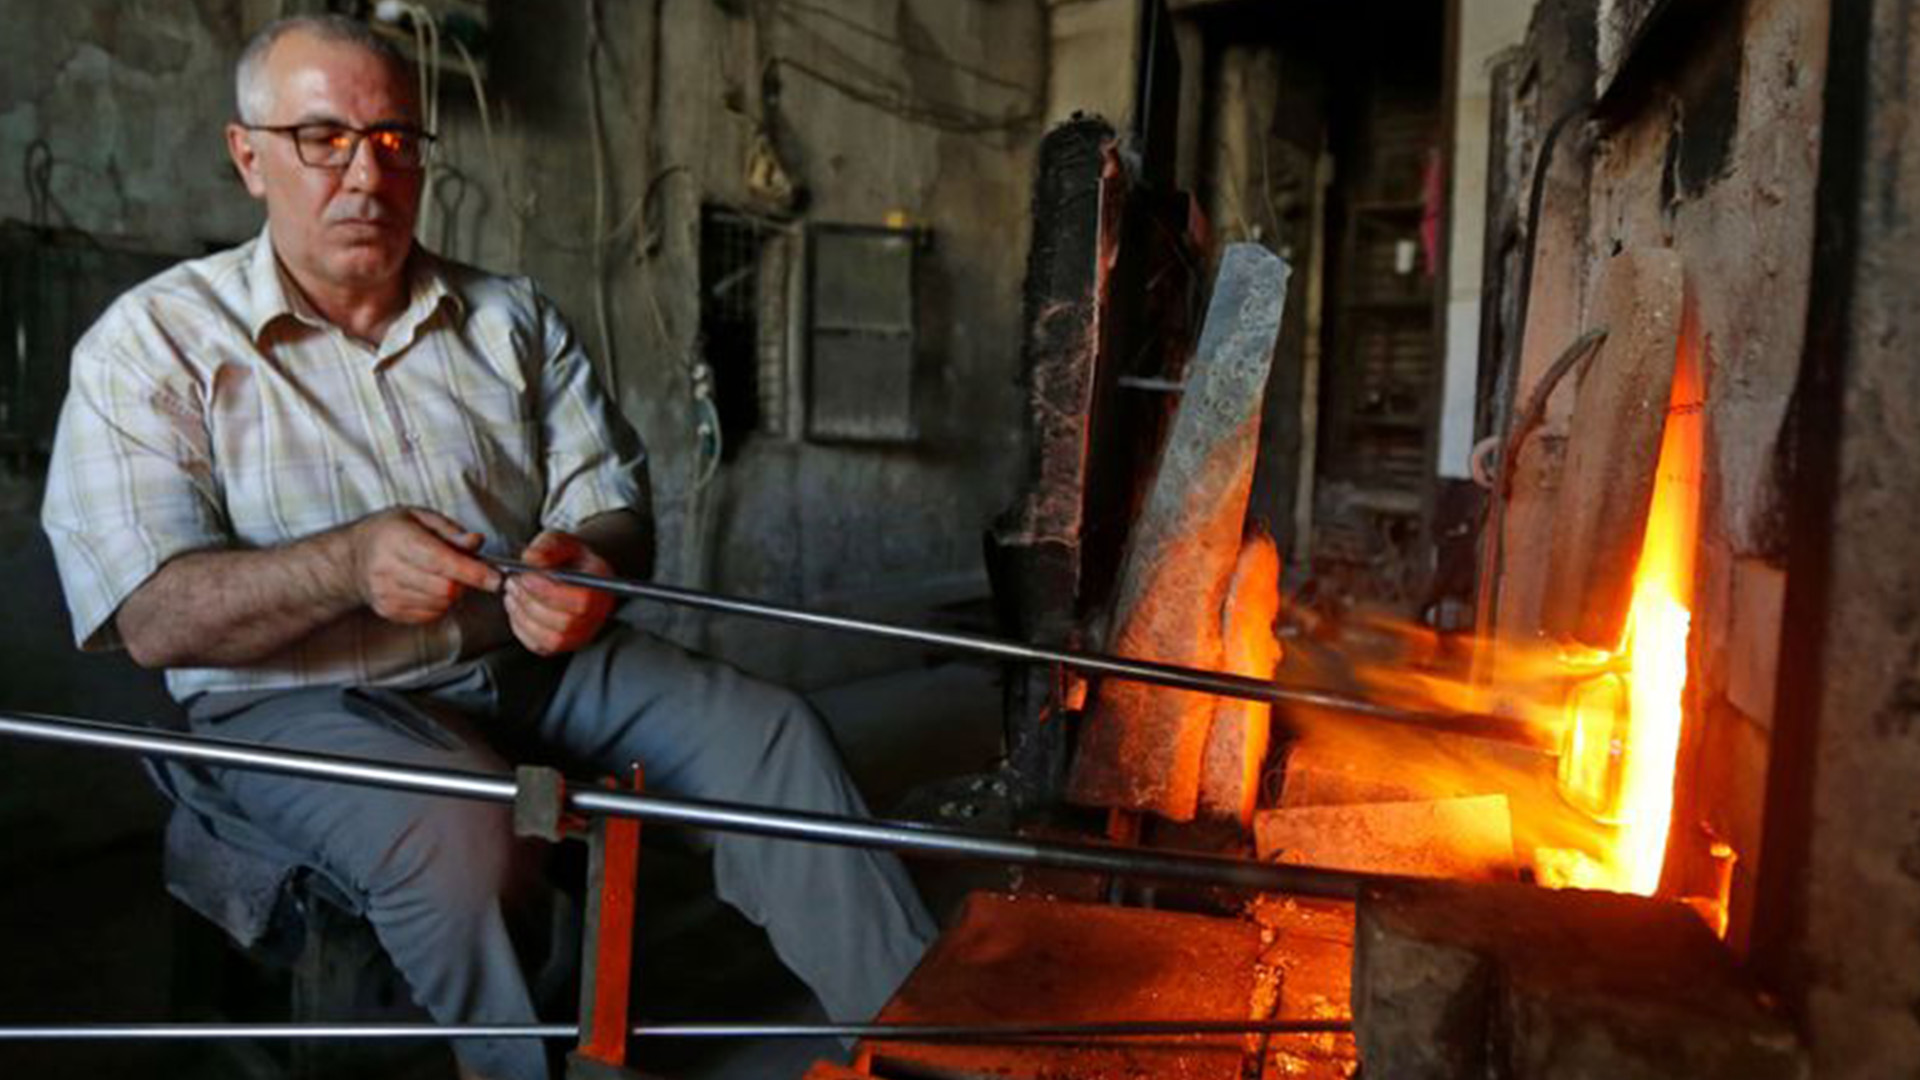 The photograph captures a skilled artisan engrossed in the creation of a remarkable piece of glass art, showcasing the art of glassblowing in Damascus.